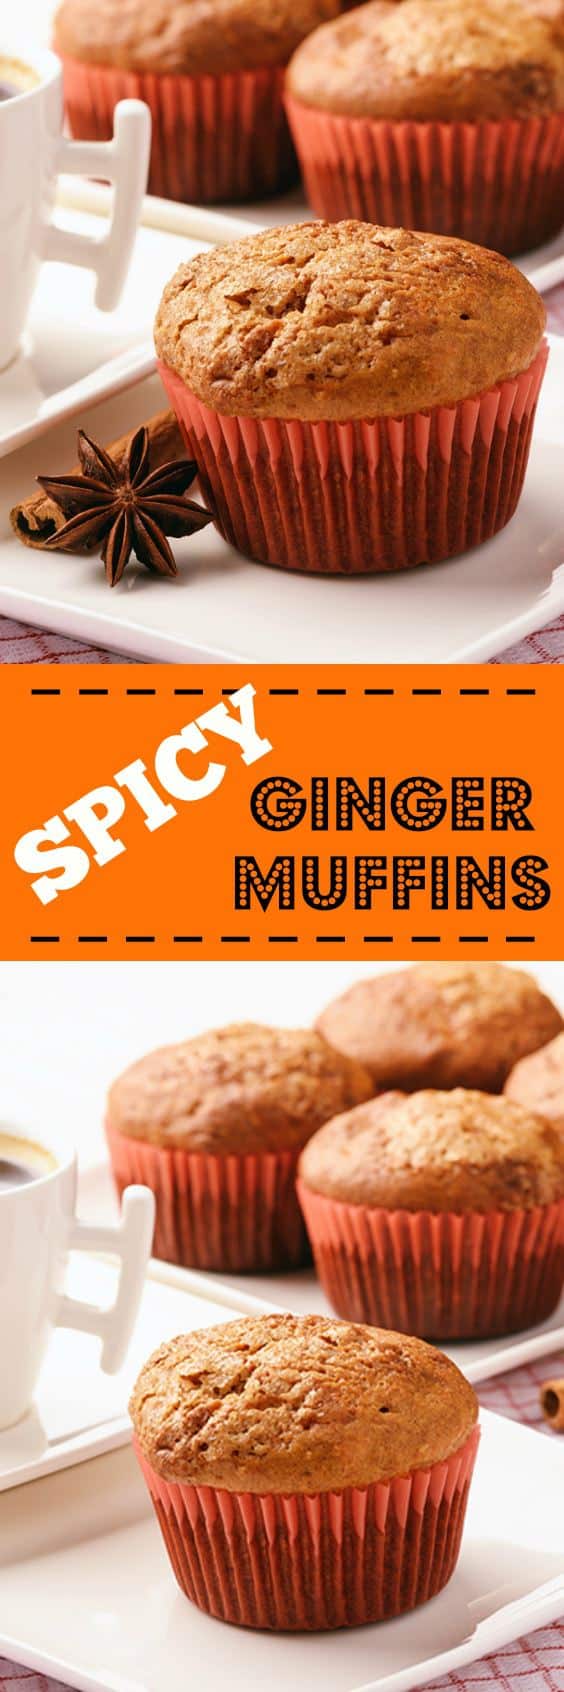 Delicious and easy, these spicy ginger muffins are sure to be a hit with the kids! Mine take these for school lunches all the time! From @kitchenmagpie #muffins #gingerbread #sweets #baking #school #lunch